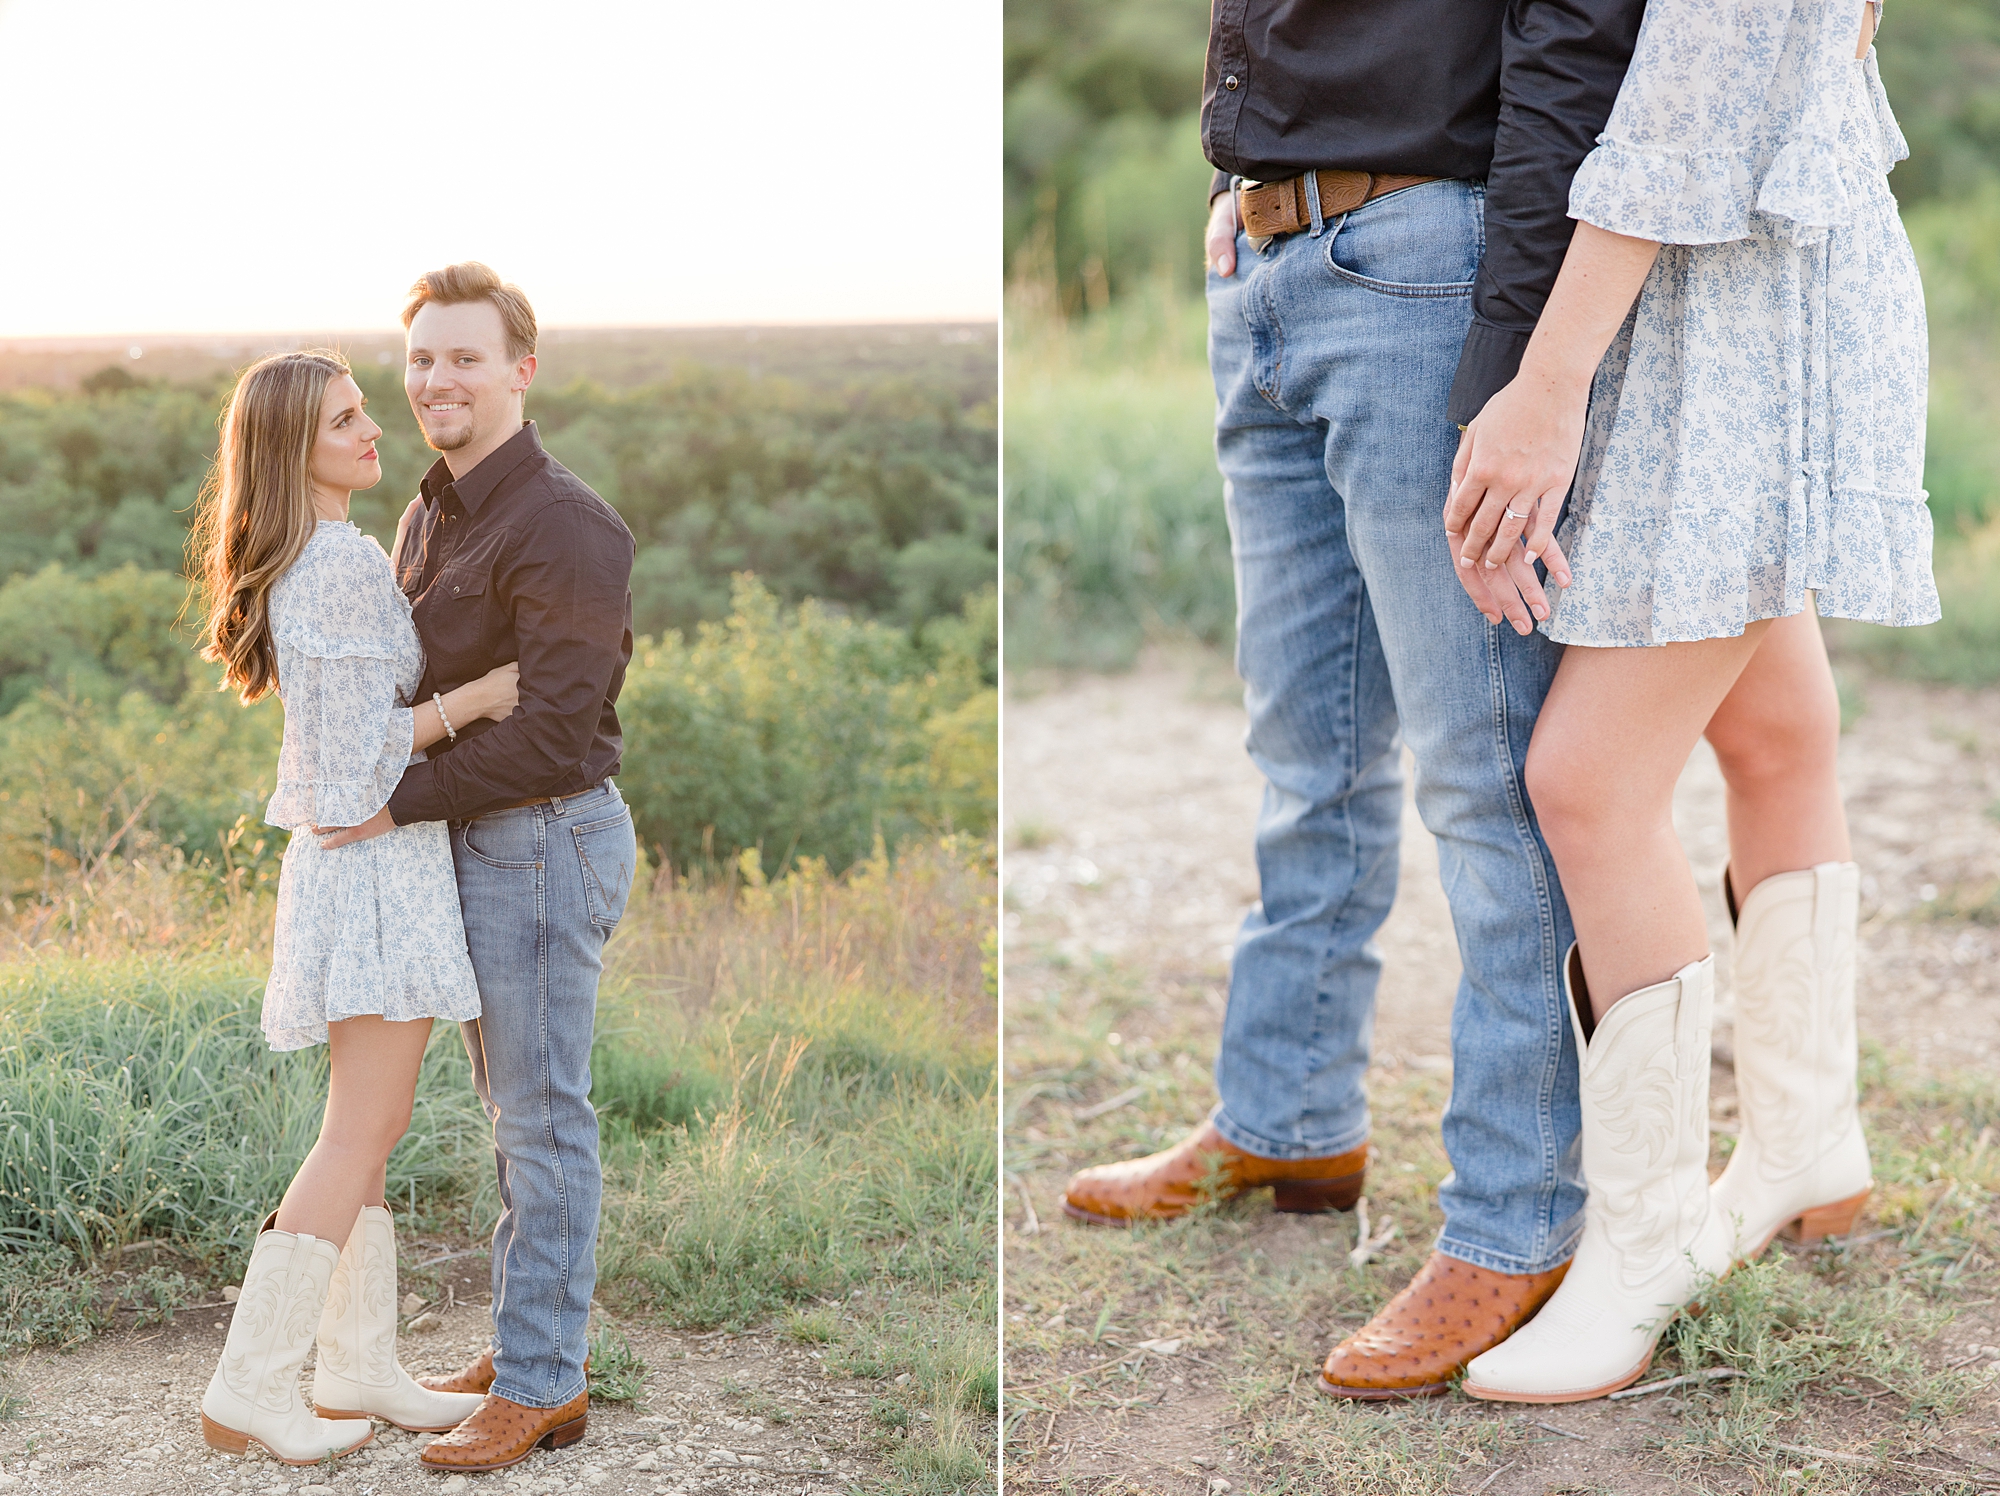 Texas couple shows off cowboy boots